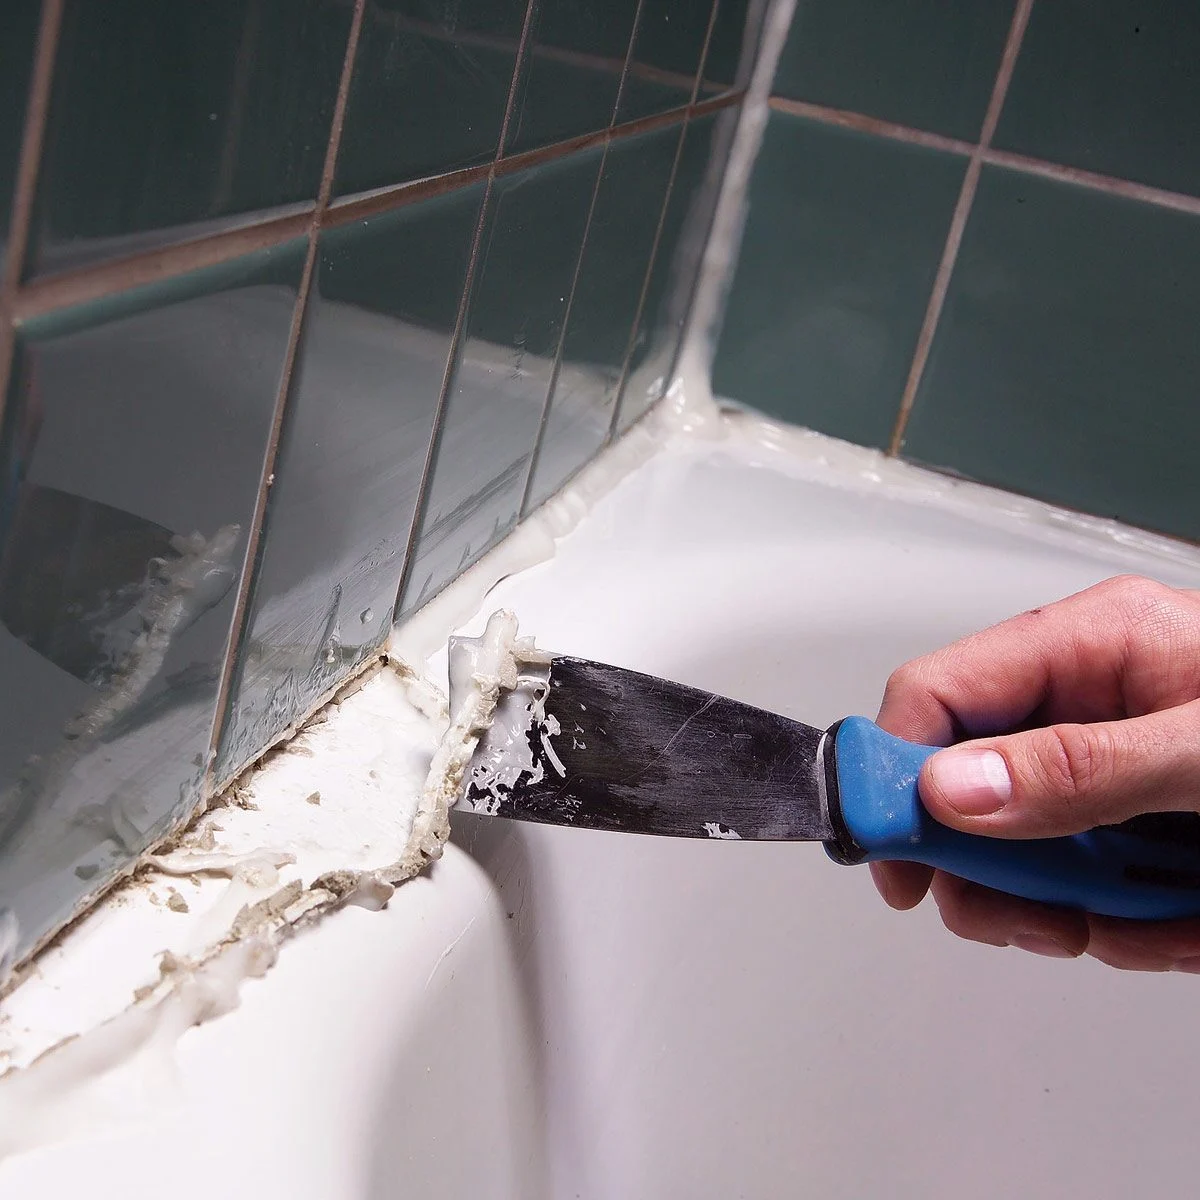 How To Remove Old Caulking From Bathtub